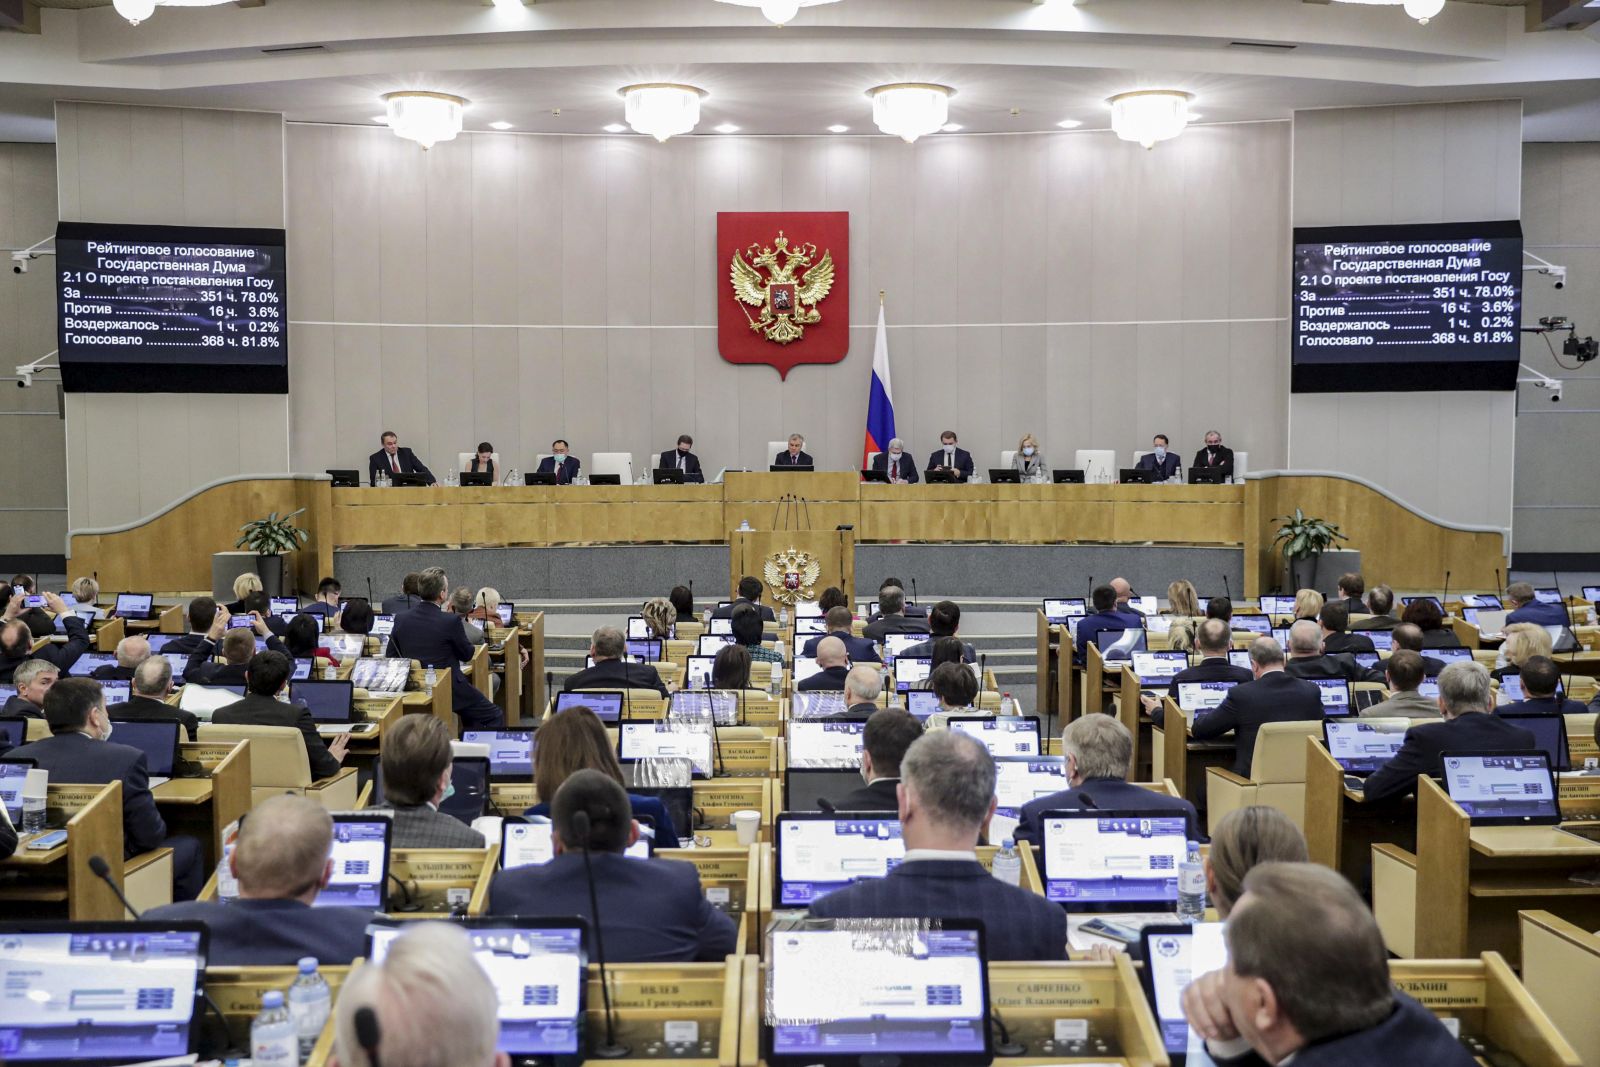 epa09759550 A handout photo made available by the press service of the Russian State Duma shows the plenary session of the State Duma (Russia's lower house of parliament) during election for the draft resolution 'On the appeal of the State Duma' to the President of the Russian Federation Vladimir Putin on the need to recognise the Donetsk People's Republic and the Lugansk People's Republic in Moscow, Russia, 15 February 2022. Russian deputies supported the resolution on the appeal to the Vladimir Putin on the need to recognise the DPR and LPR. As the Chairman of the State Duma Vyacheslav Volodin noted, the appeal will be sent immediately. The deputies believe that the recognition of the DPR and LPR will create grounds for guaranteeing the security and protection of the inhabitants of the republics from external threats, as well as for strengthening international peace and regional stability in accordance with the purposes and principles of the UN Charter and will initiate the process of international recognition of both states  EPA/RUSSIAN STATE DUMA PRESS SERVICE HANDOUT HANDOUT EDITORIAL USE ONLY/NO SALES HANDOUT EDITORIAL USE ONLY/NO SALES